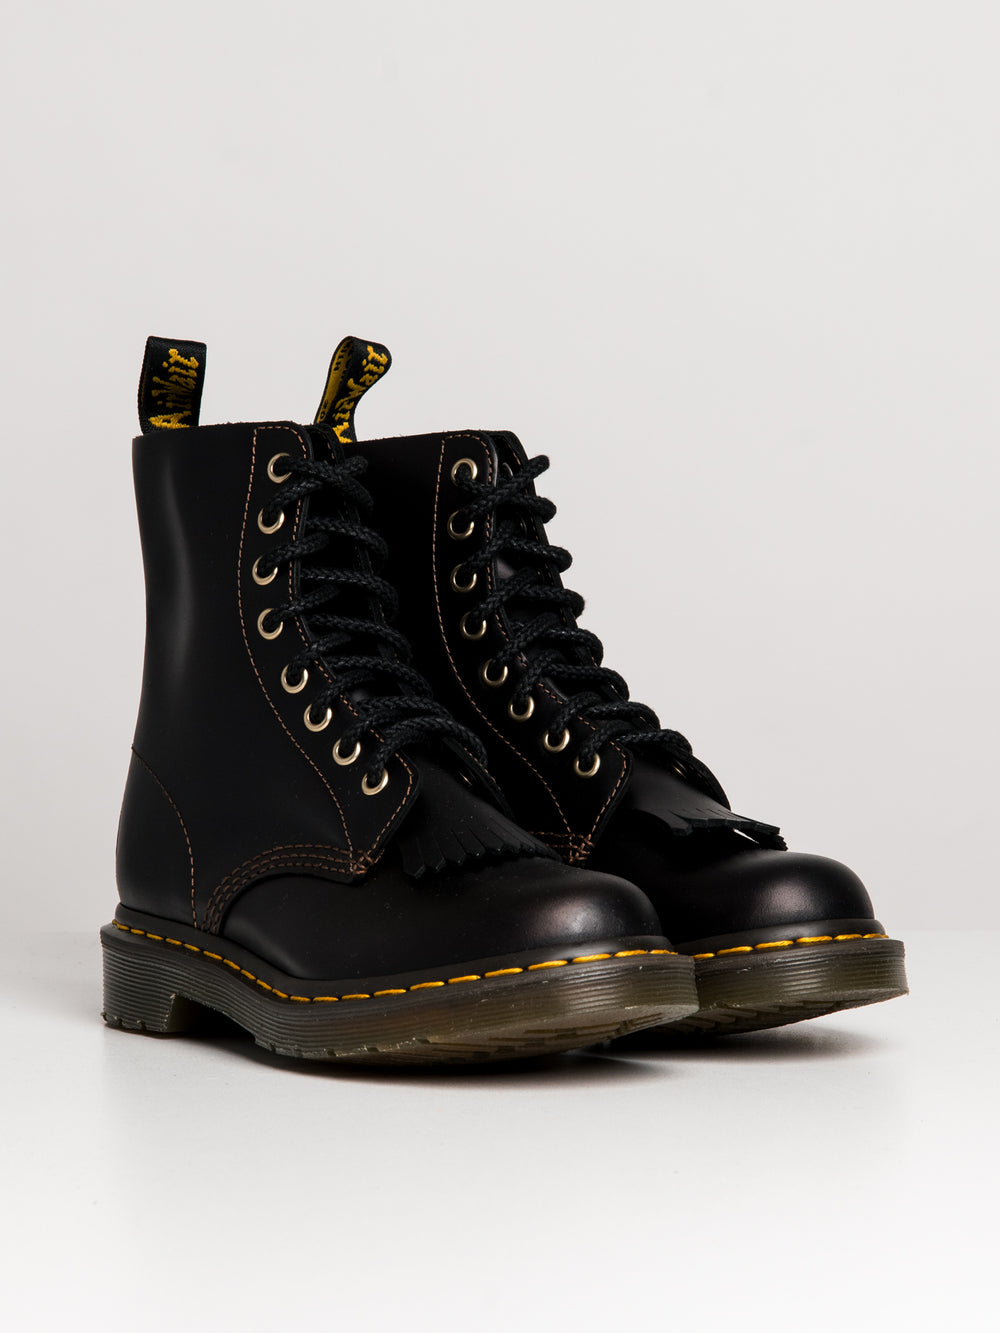 WOMENS DR MARTENS 1460 PASCAL ABRUZZO WATERPROOF BOOT - CLEARANCE